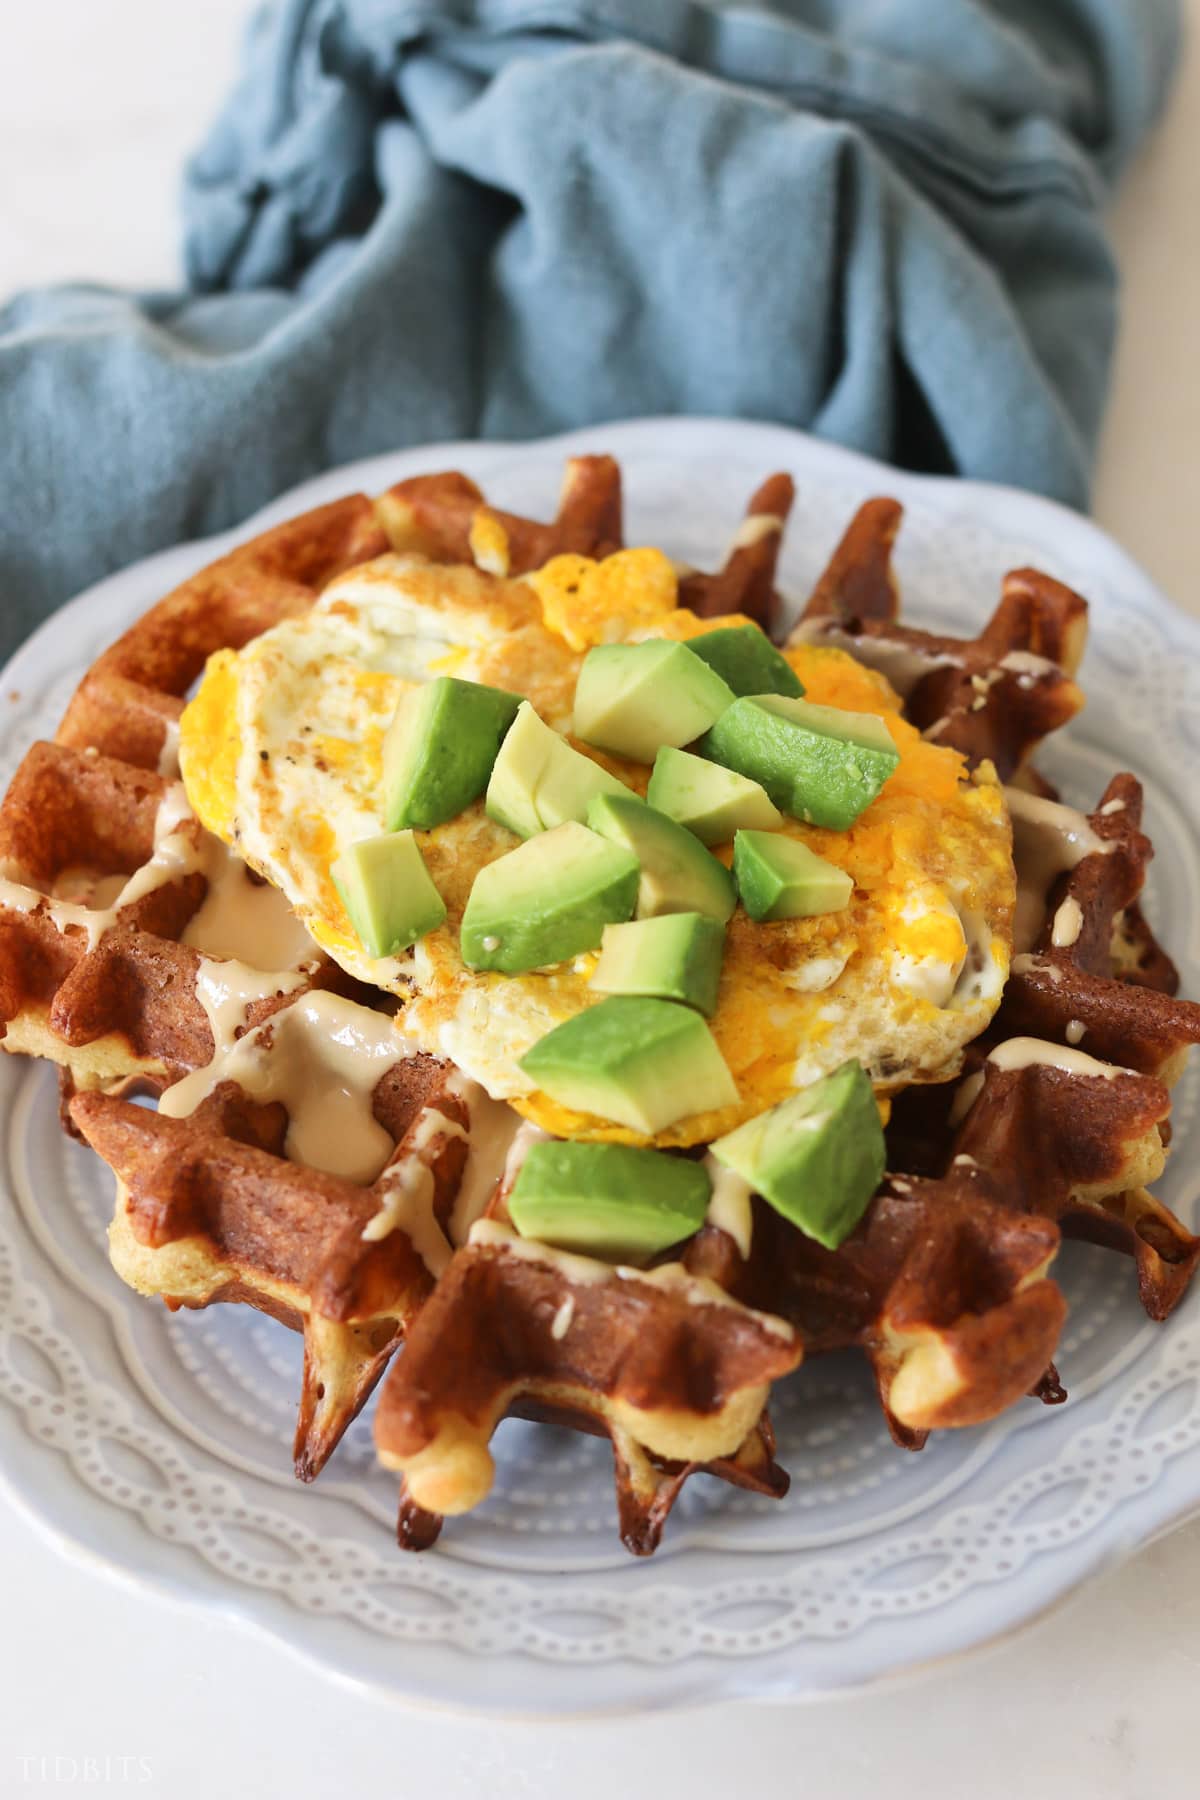 Quick dinner of waffles with eggs and avacado